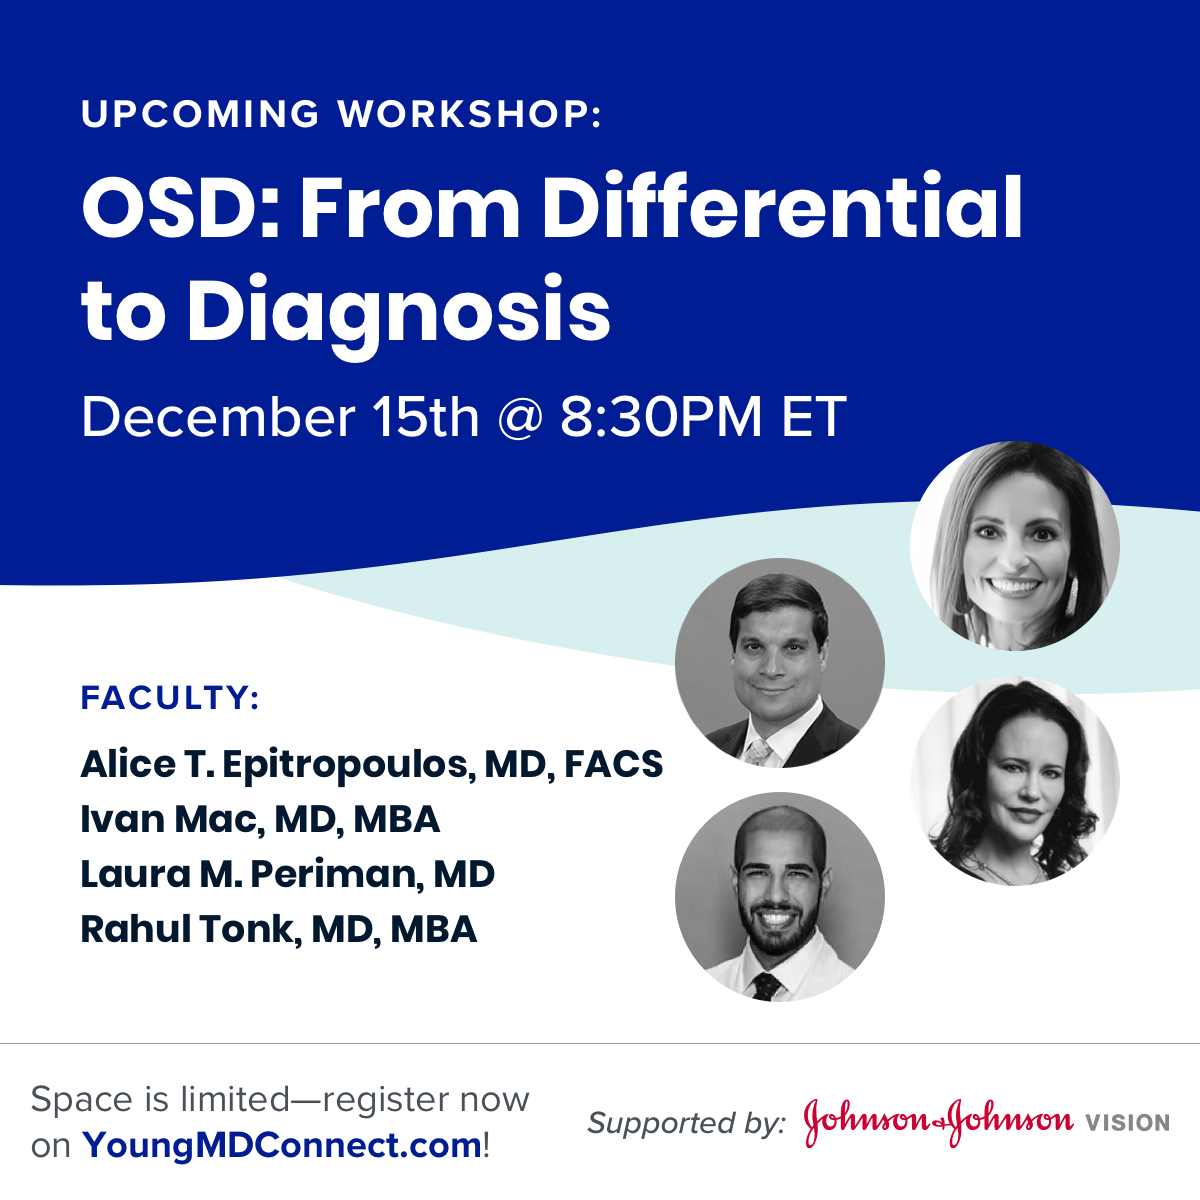 OSD is one of the most common reasons for seeking a consultation with an #eyecare provider, yet it's underappreciated as a vision-compromising clinical entity. This workshop, led by renowned experts in #OSD, will cover latest science & clinical pearls! https://t.co/prdkmywjGO https://t.co/nQYmp6HAdT